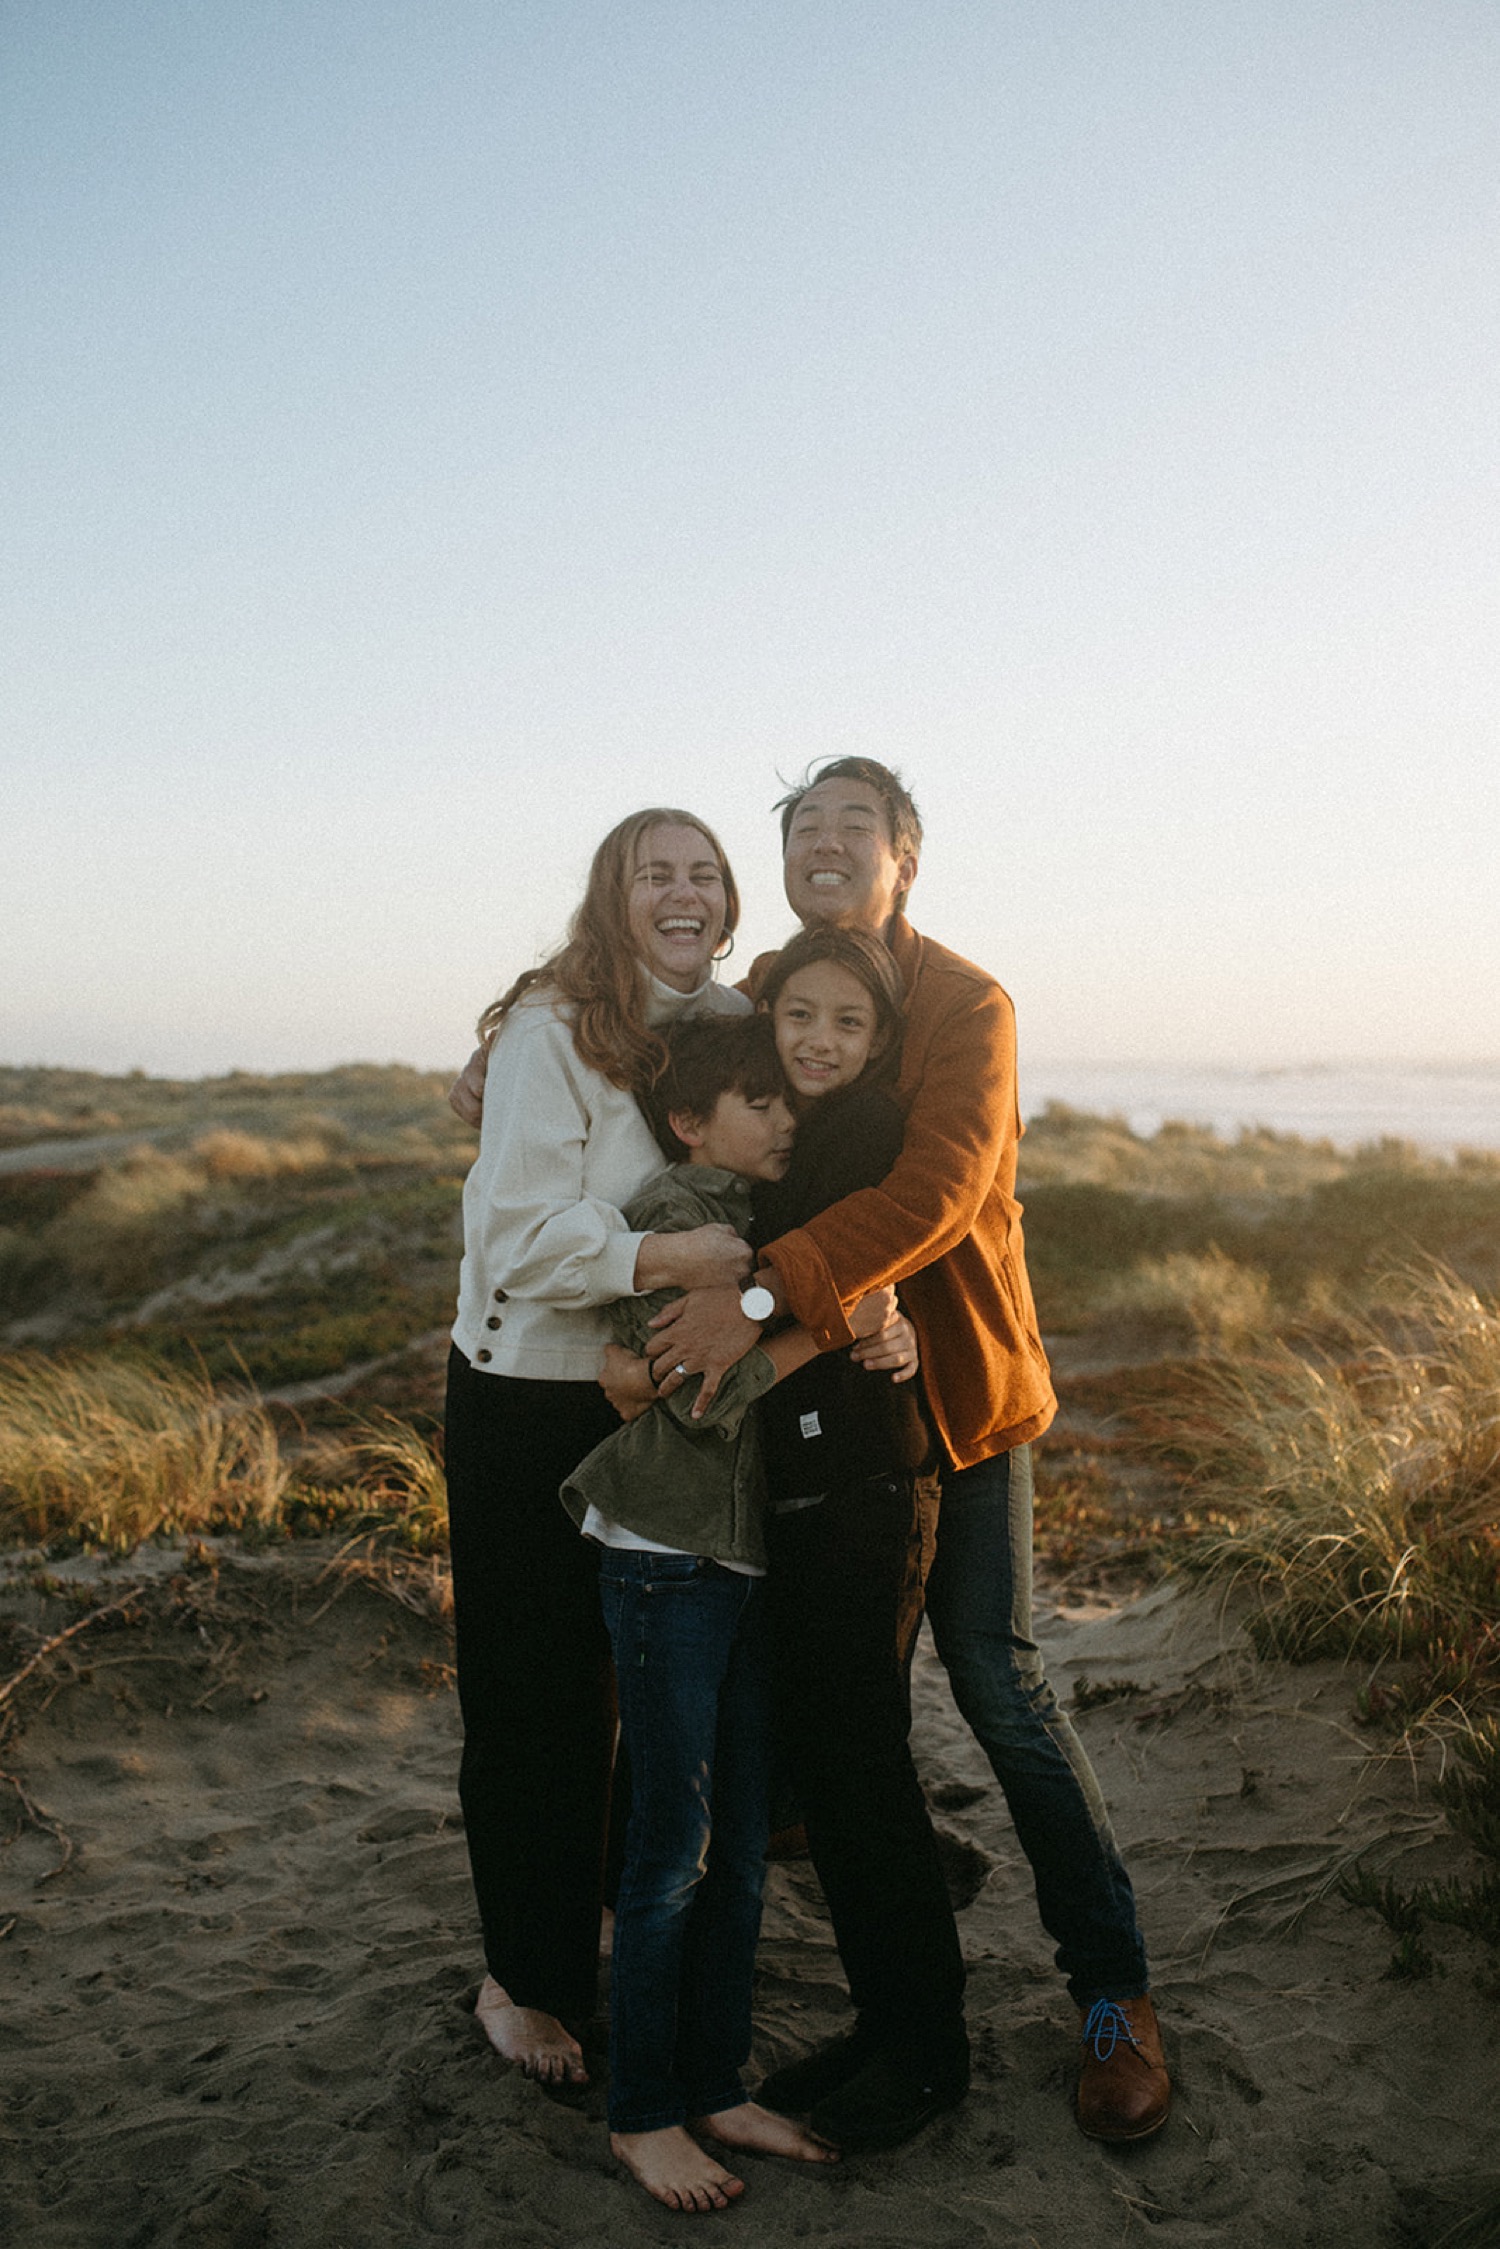 Family hugs on a sand dune in San Francisco during a photoshoot.